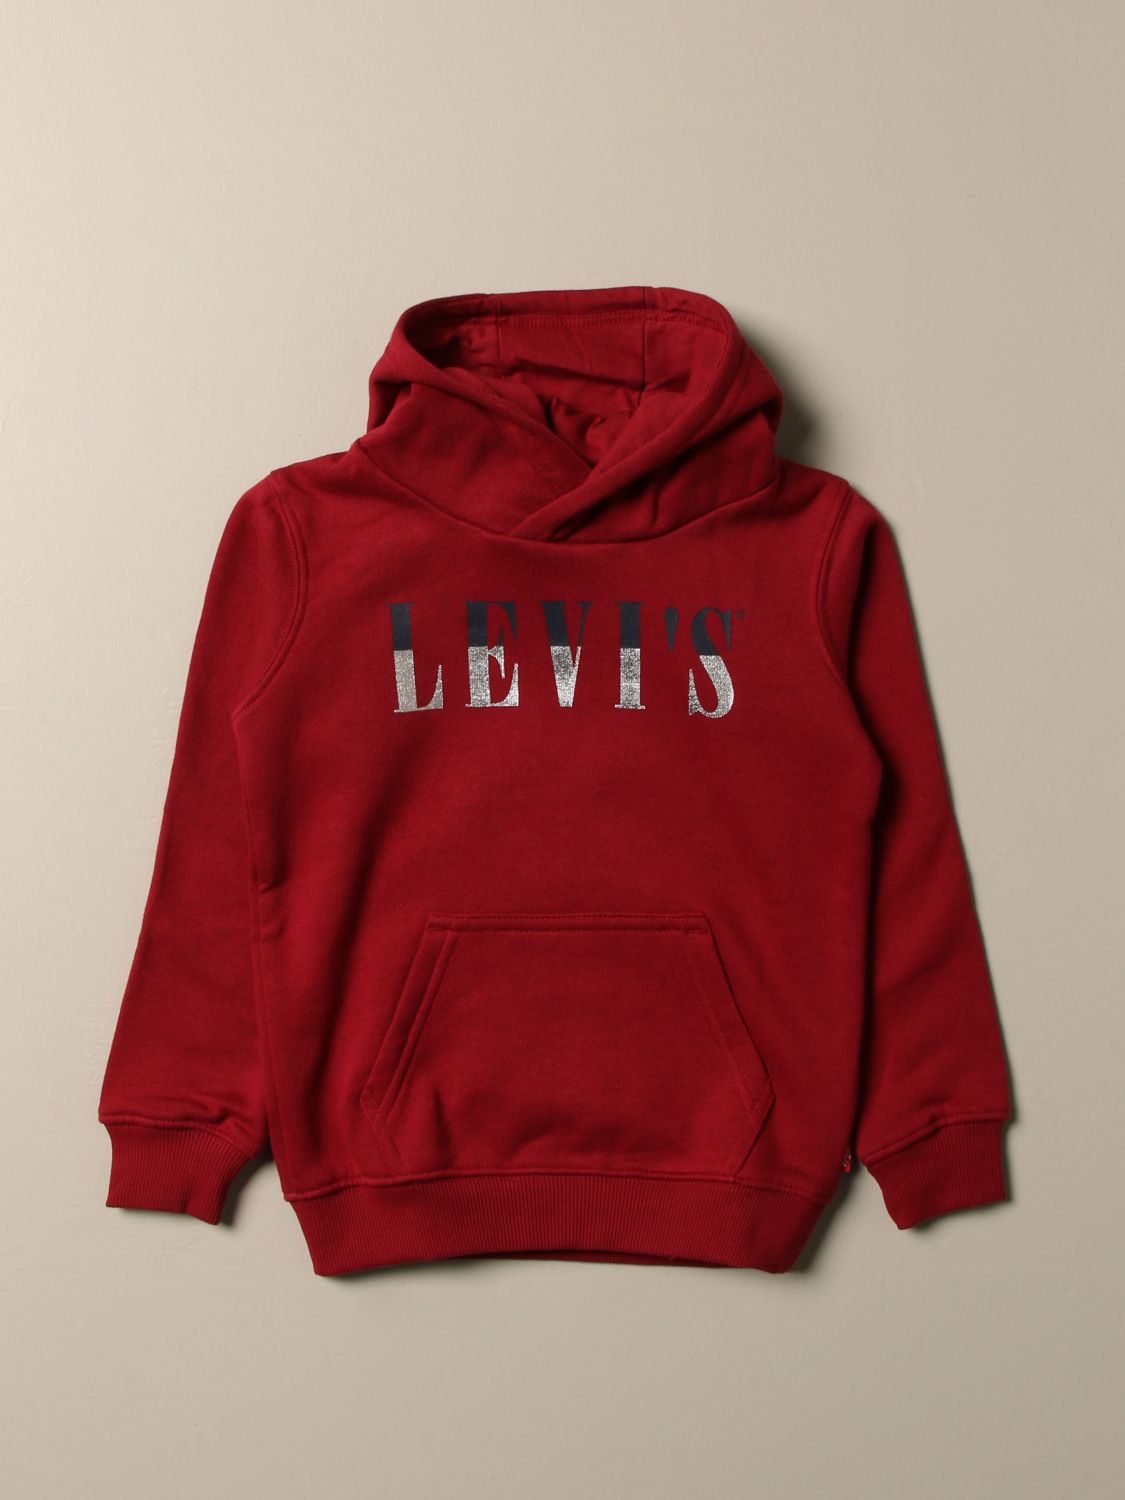 levi's red sweater